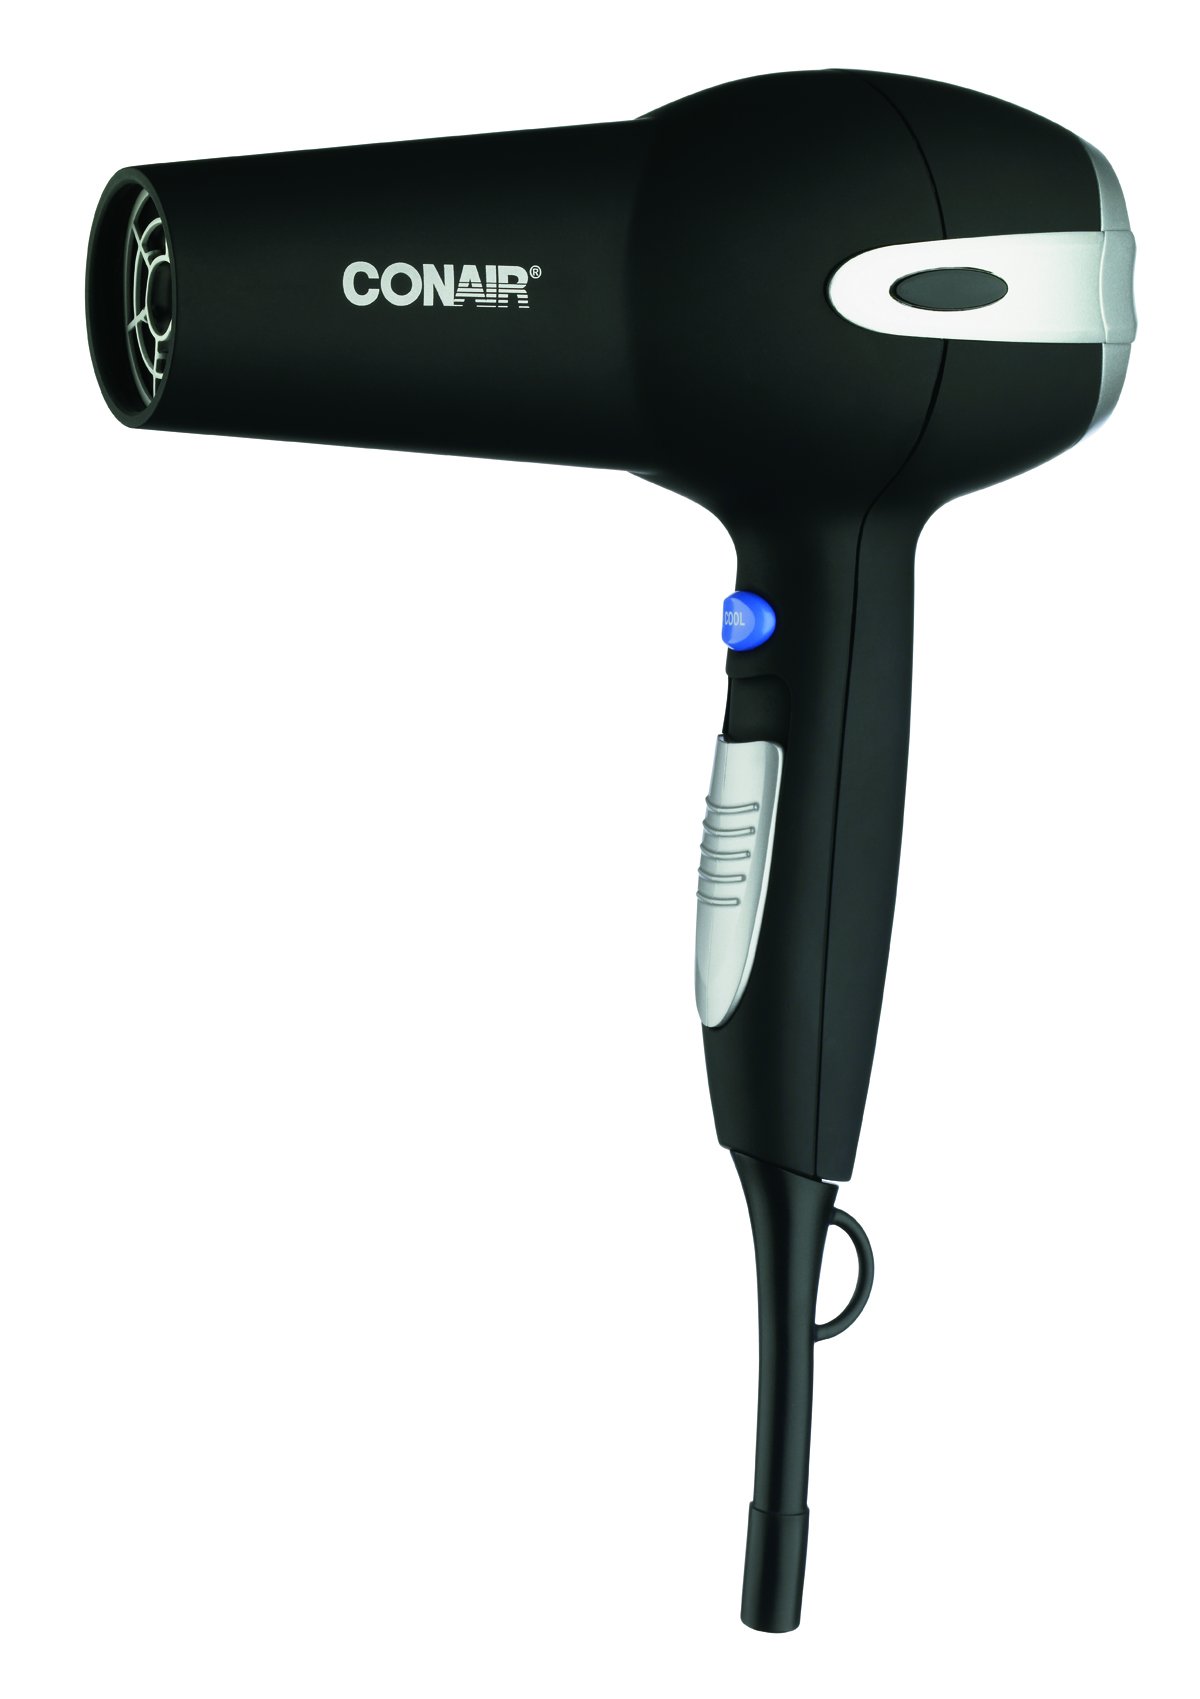 Conair 1875-Watt Ionic Ceramic Hair Dryer with Diffuser and Concentrator, Black